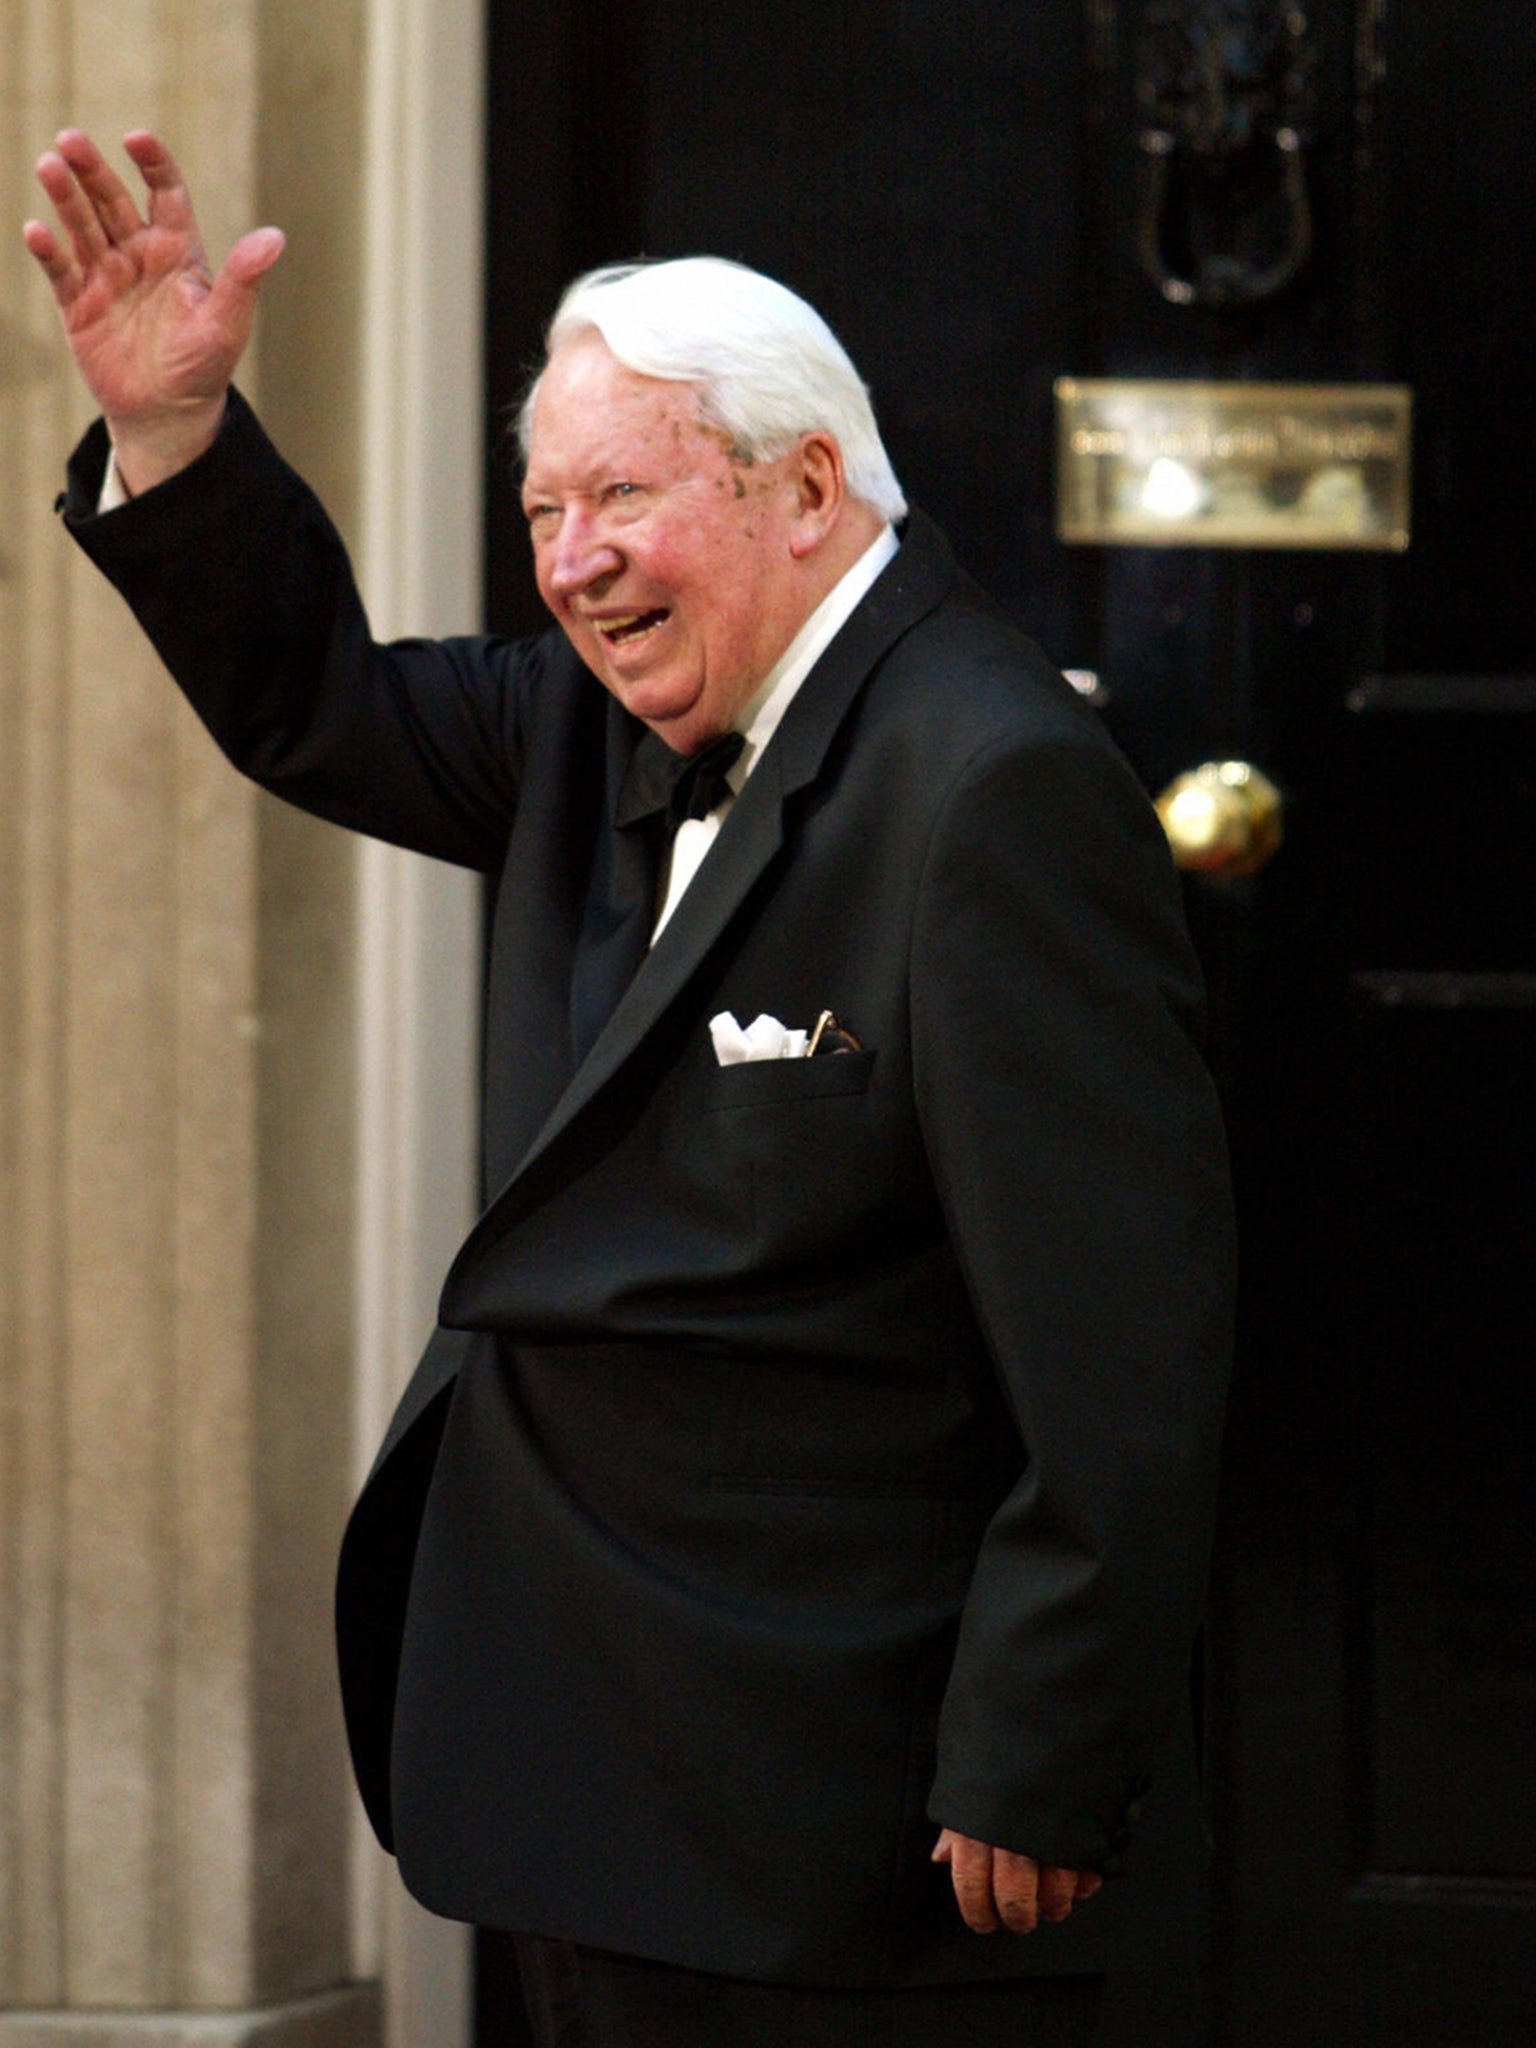 Sir Edward Heath arrives at No.10 Downing Street for a dinner hosted by Prime Minister Tony Blair in London, 2002